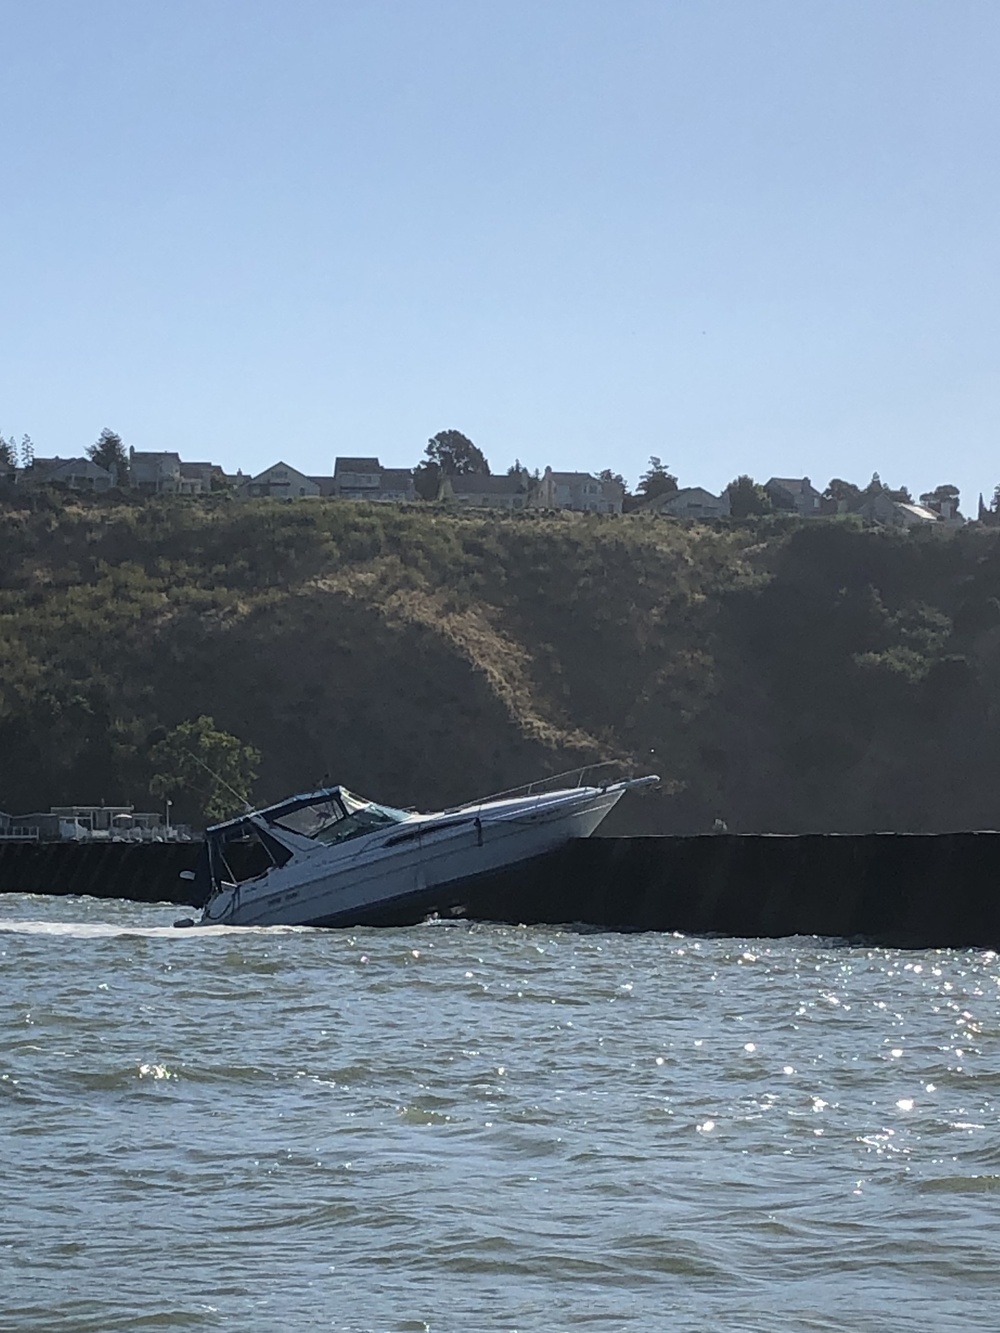 Coast Guard Station Vallejo rescues 3 after their vessel collided with a jetty